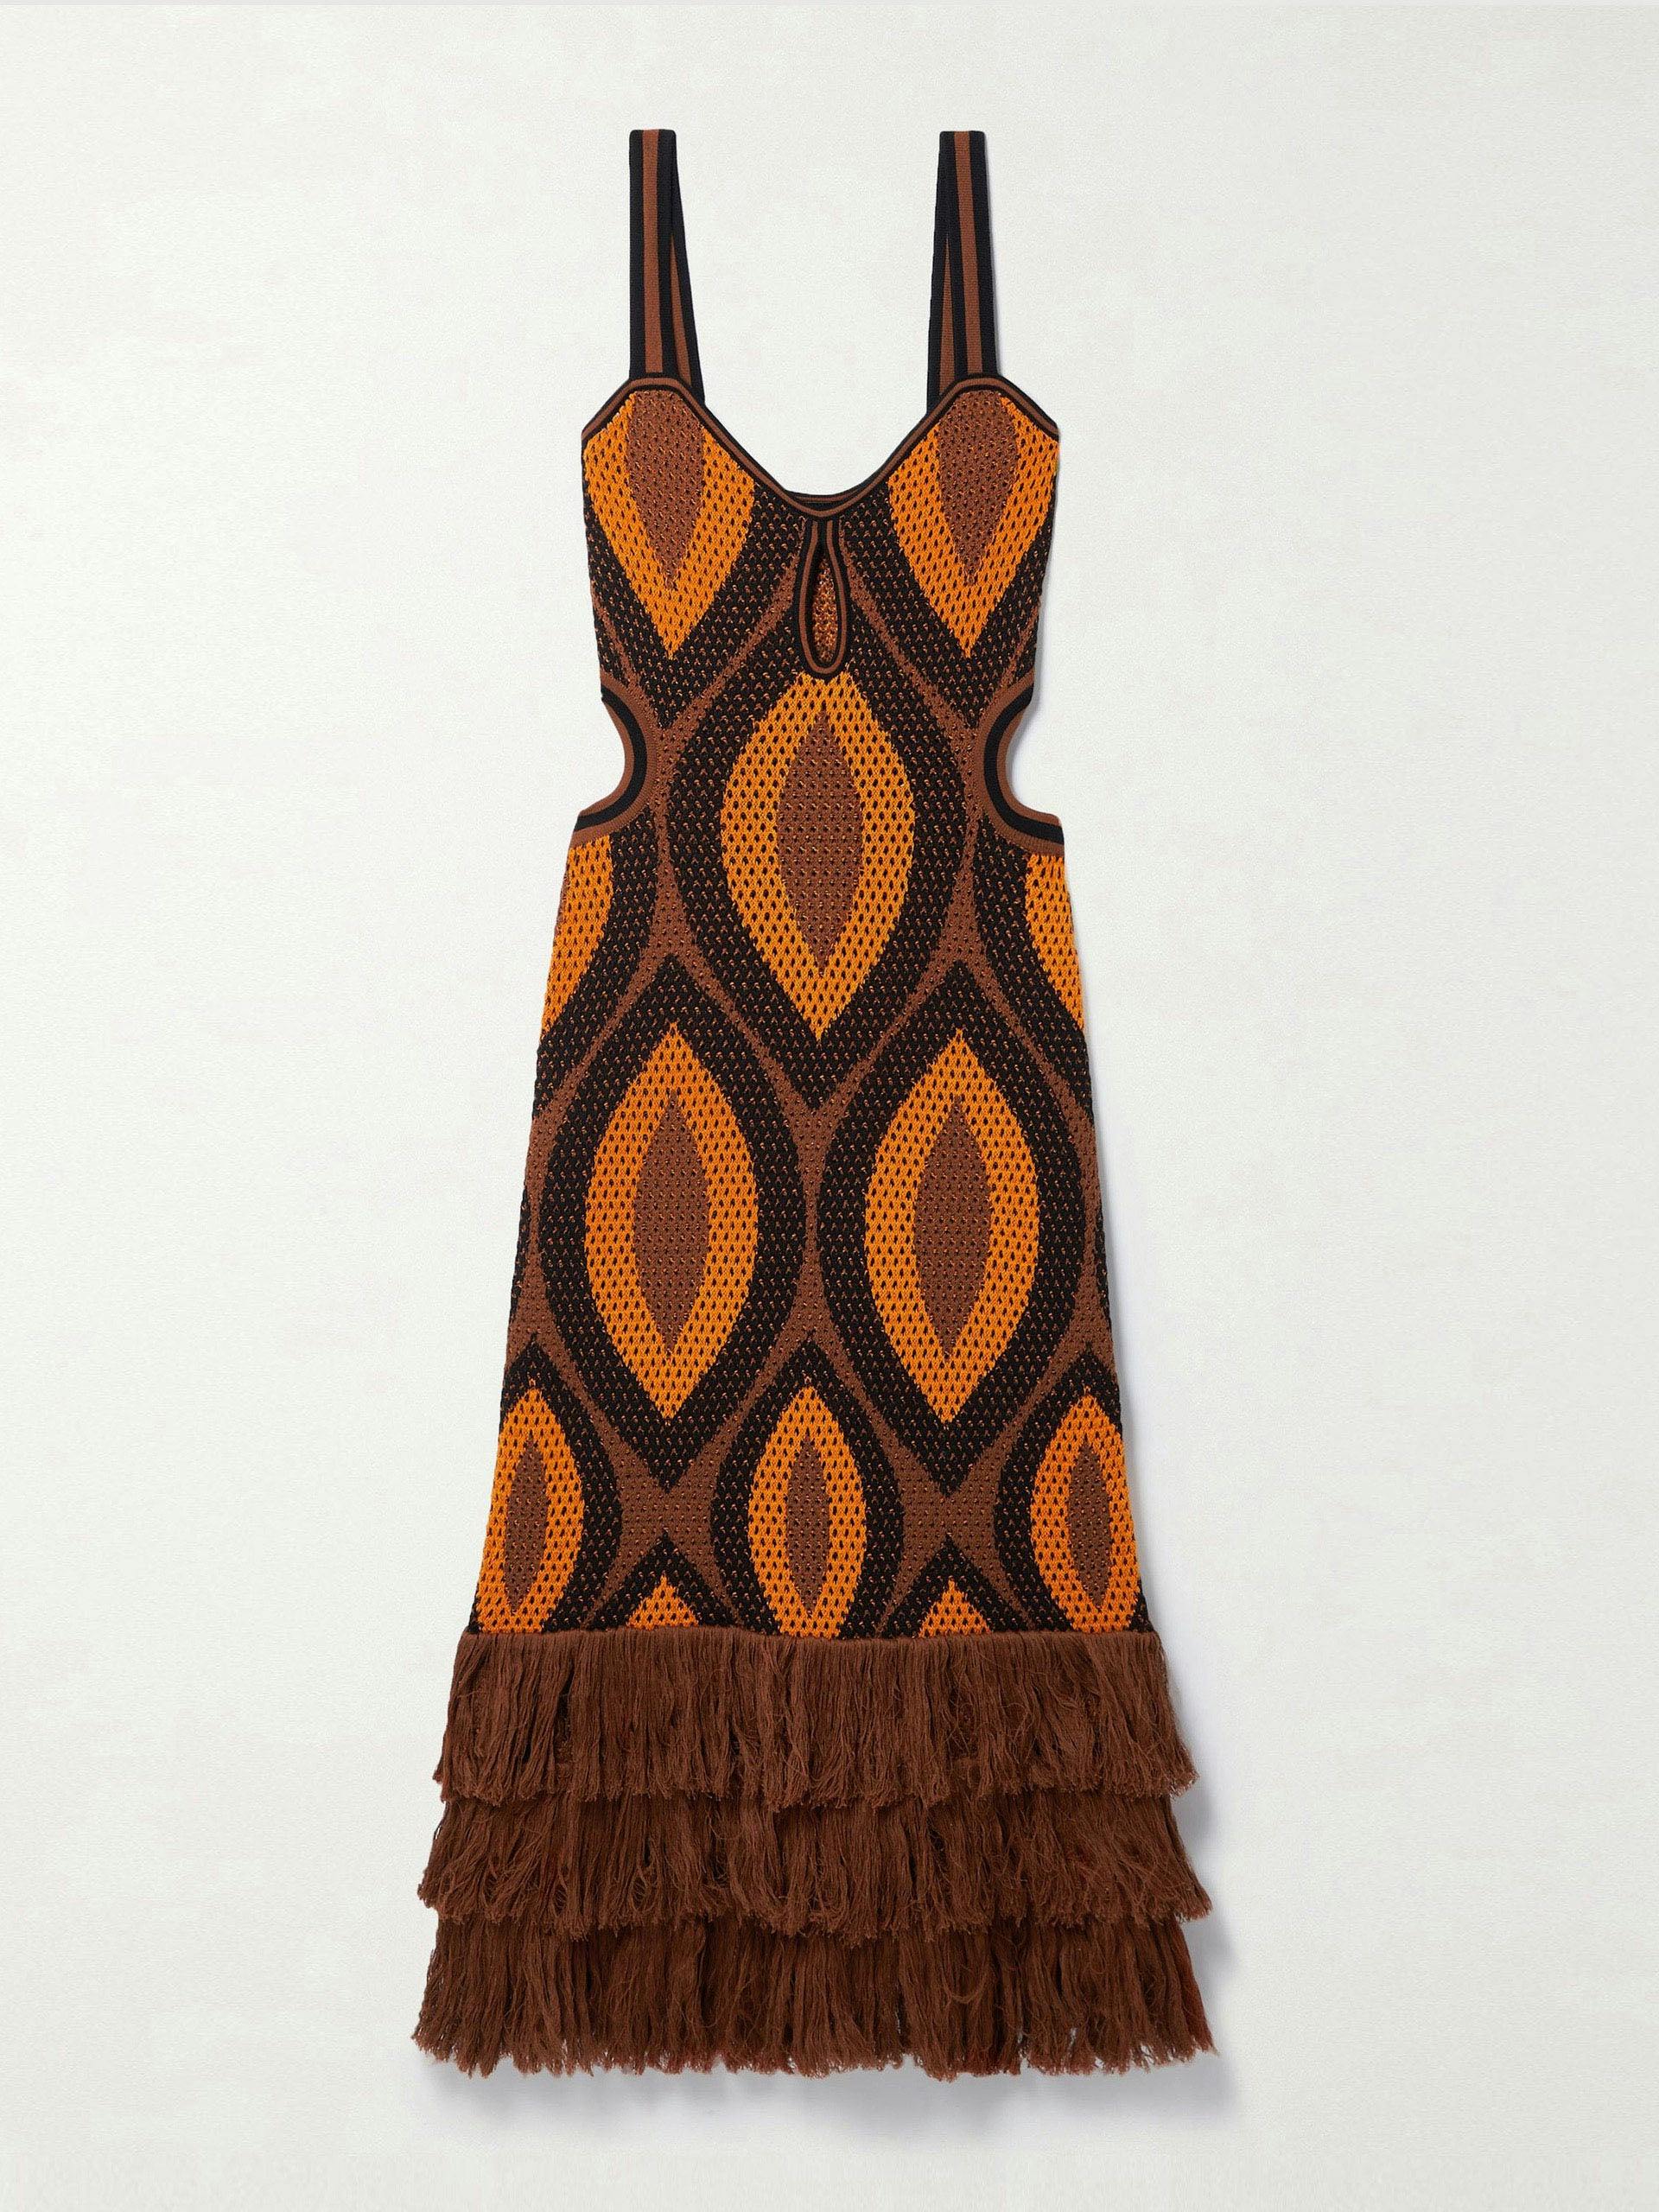 Cultural Roots cutout fringed crocheted maxi dress